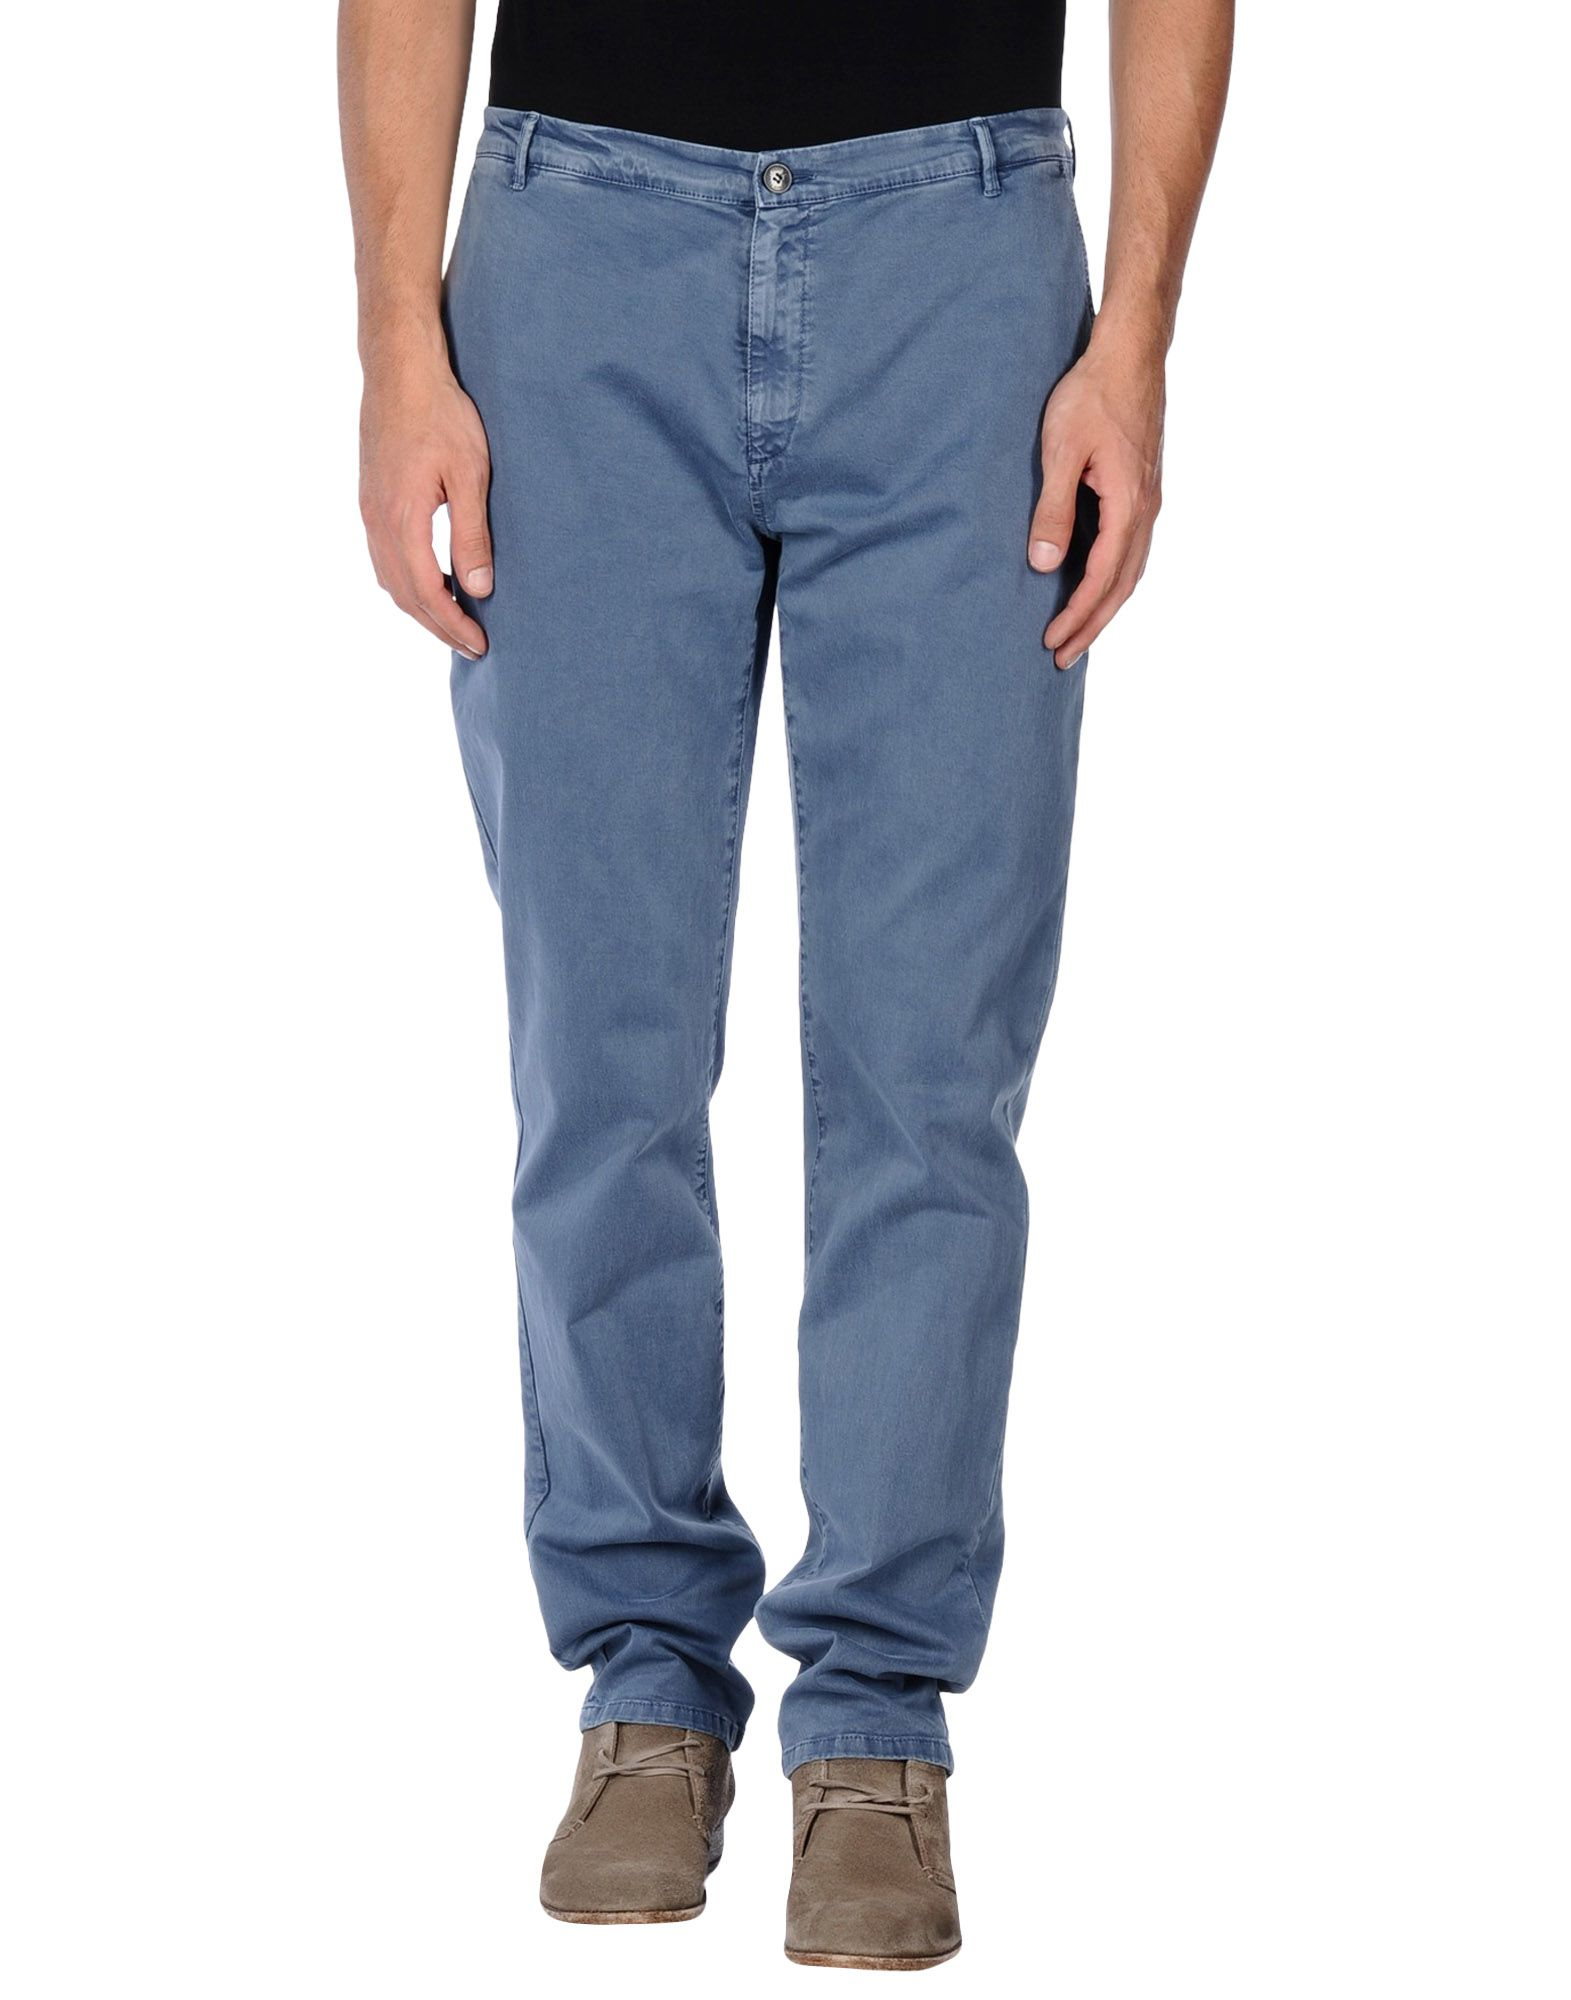 Lyst - Fred Perry Denim Trousers in Blue for Men